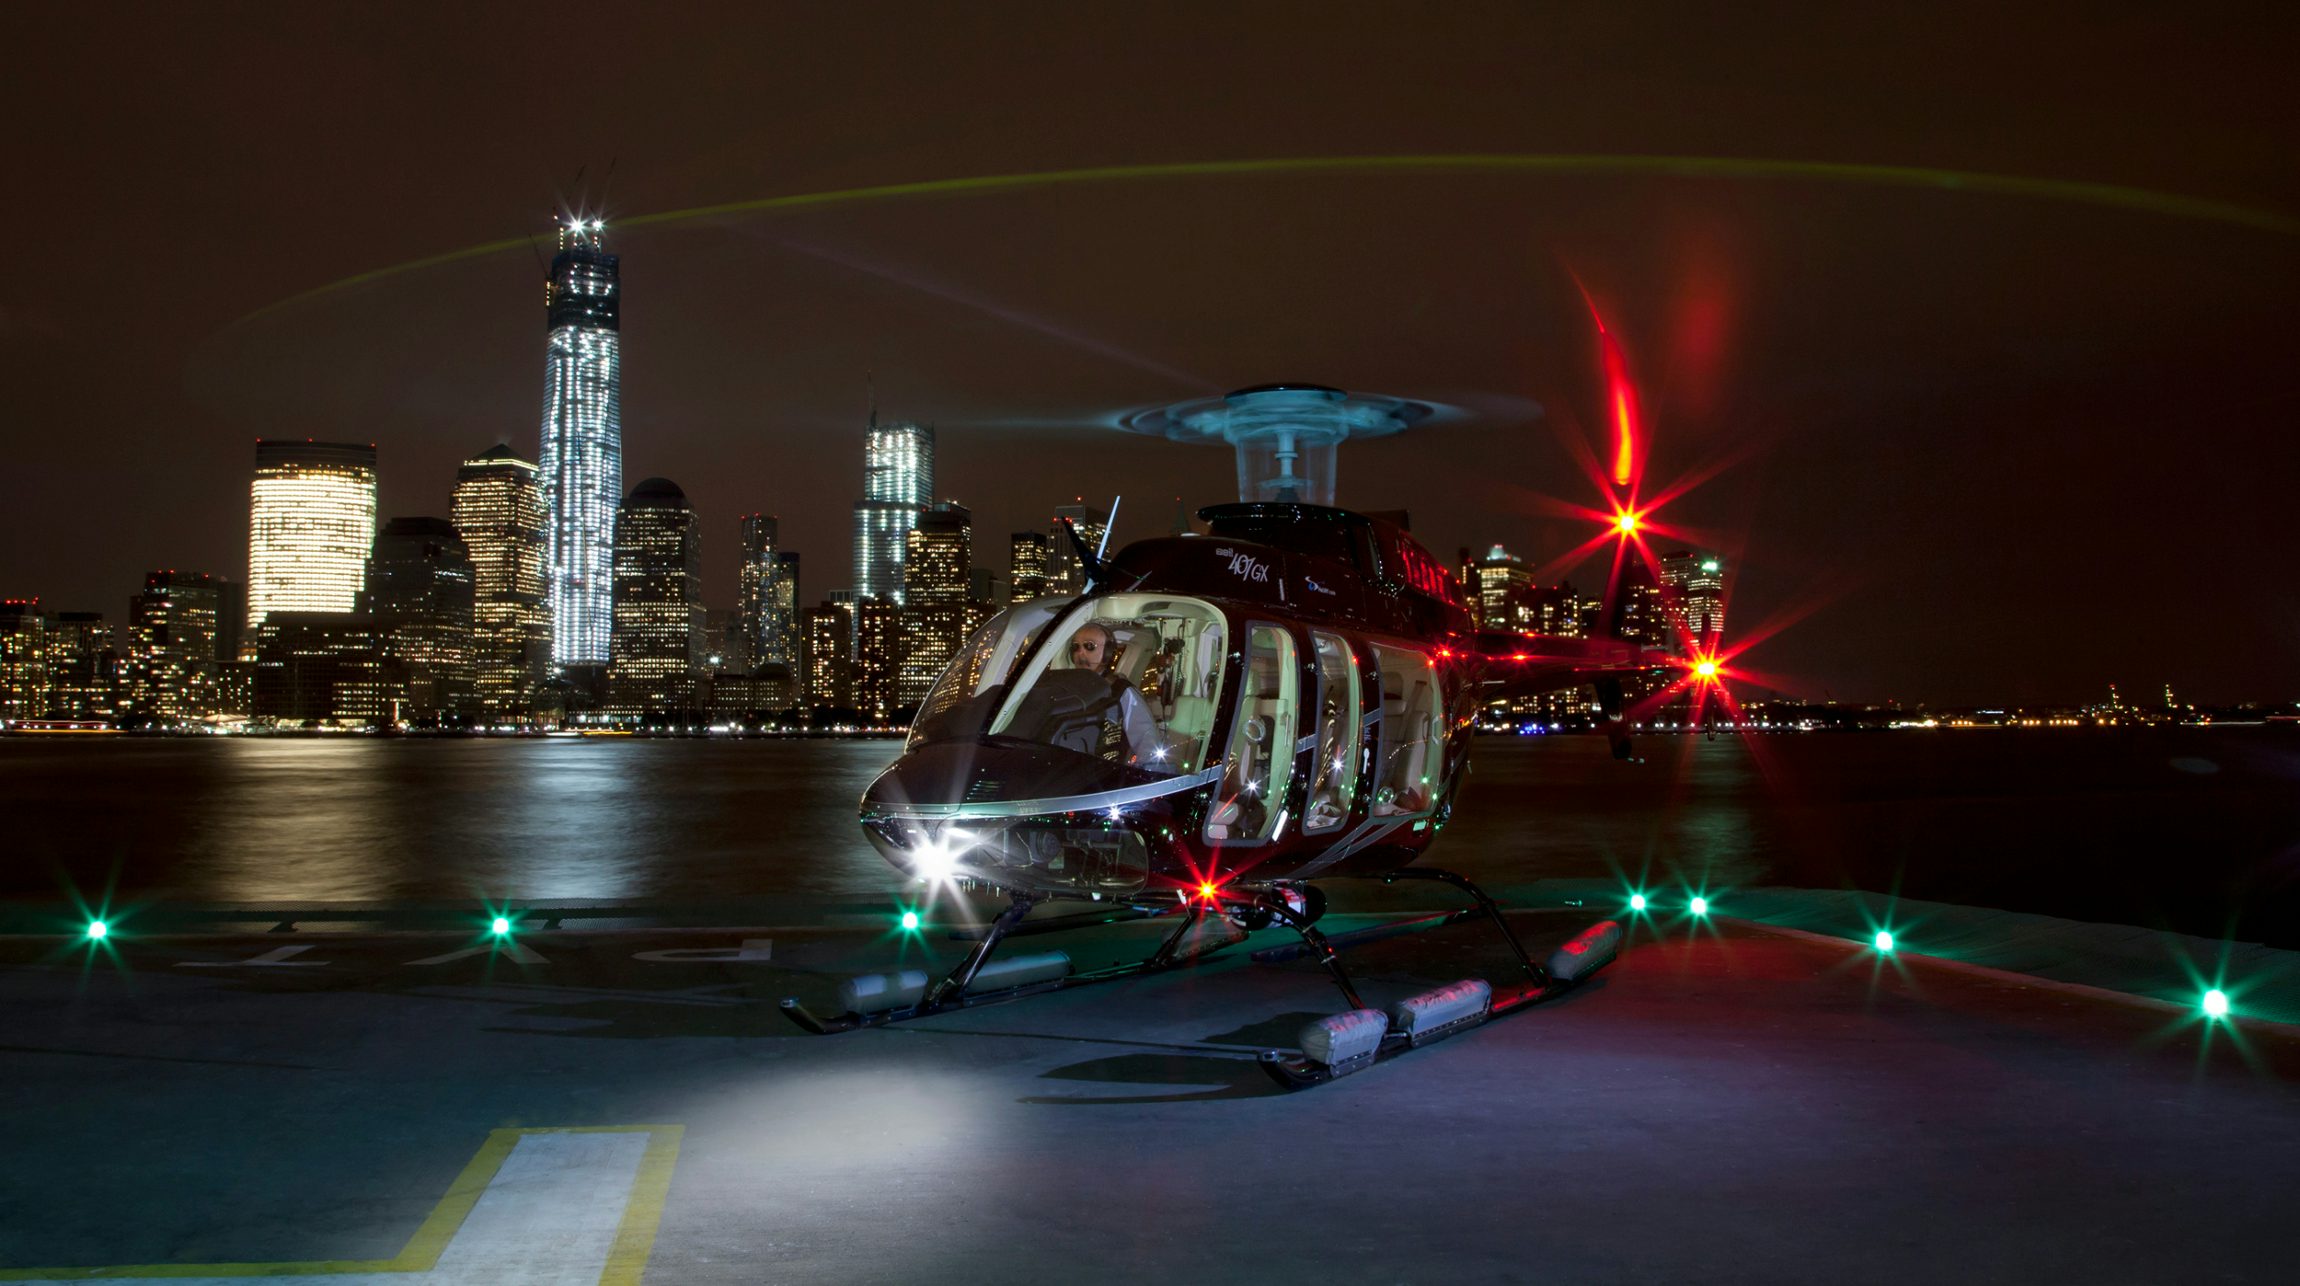 helicopter sightseeing tour nyc